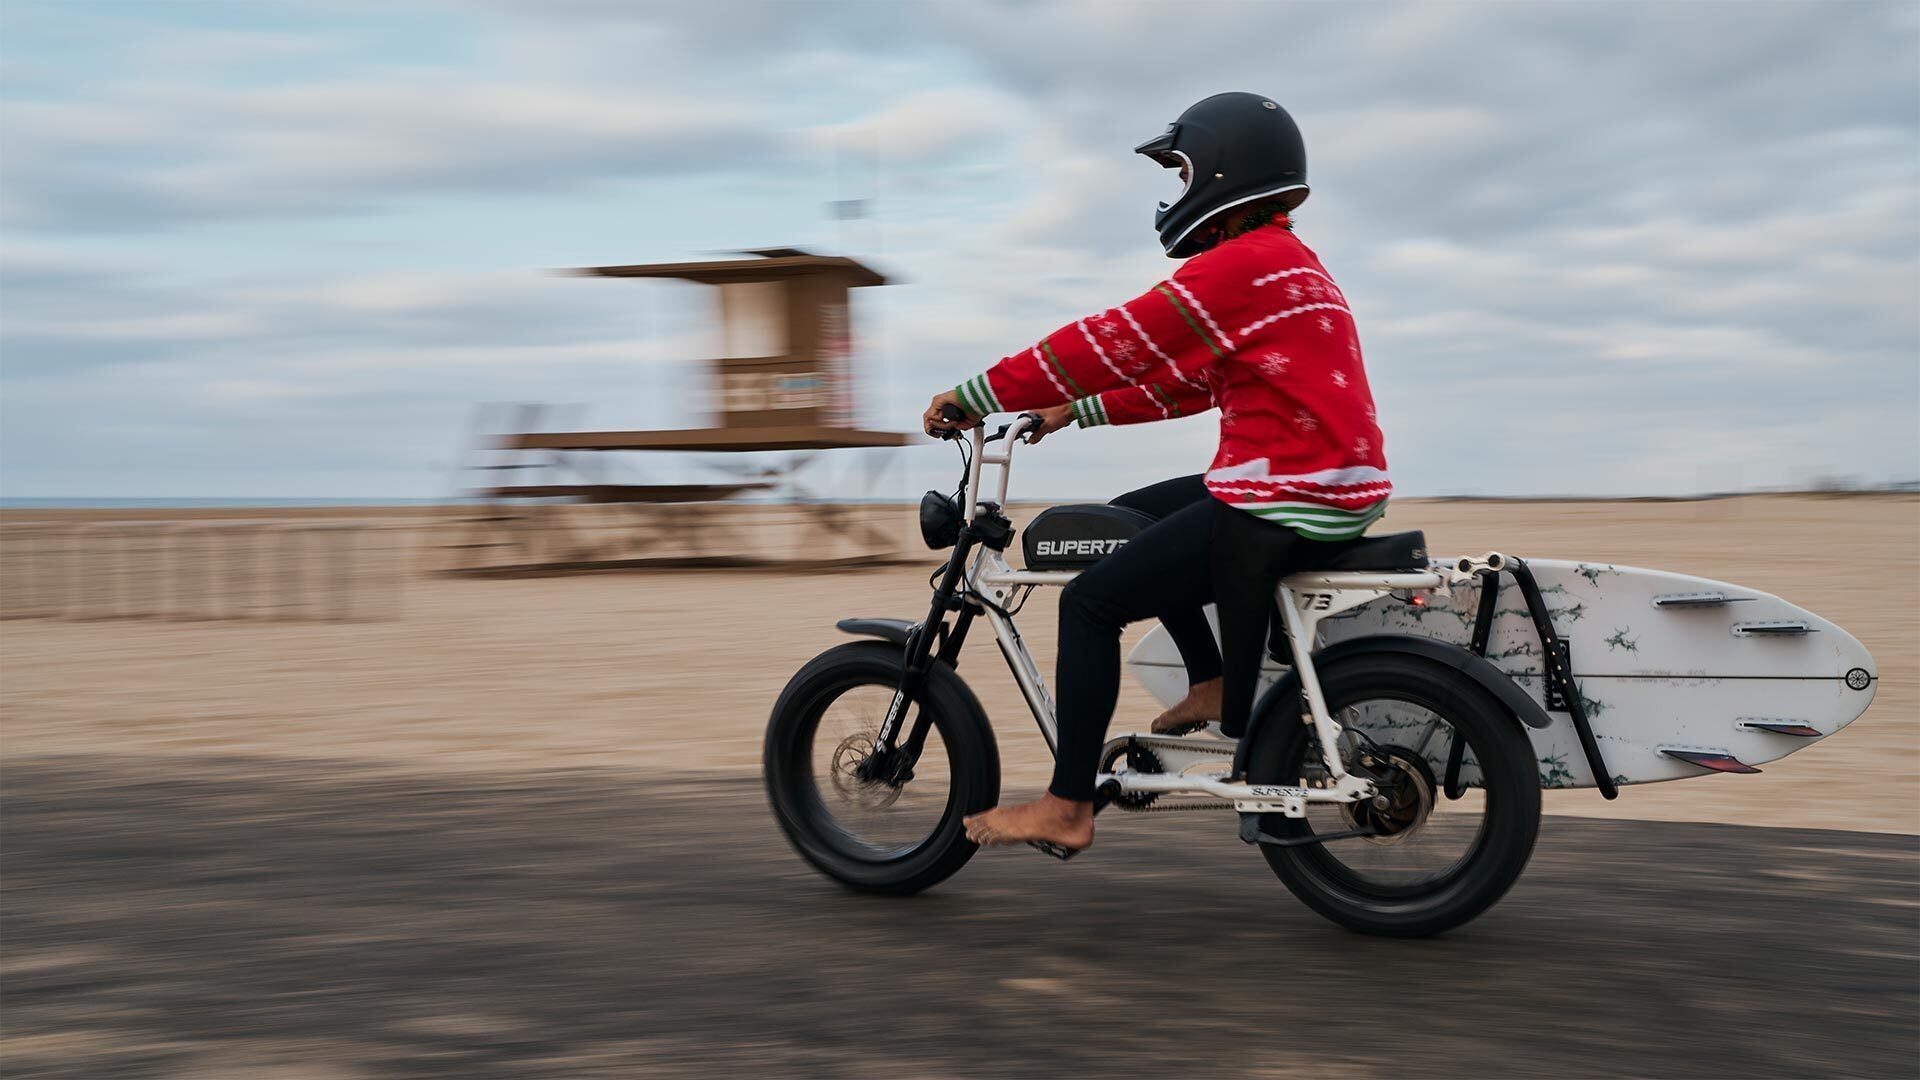 Rider in a holiday sweater at the beach riding a Super73 ebike